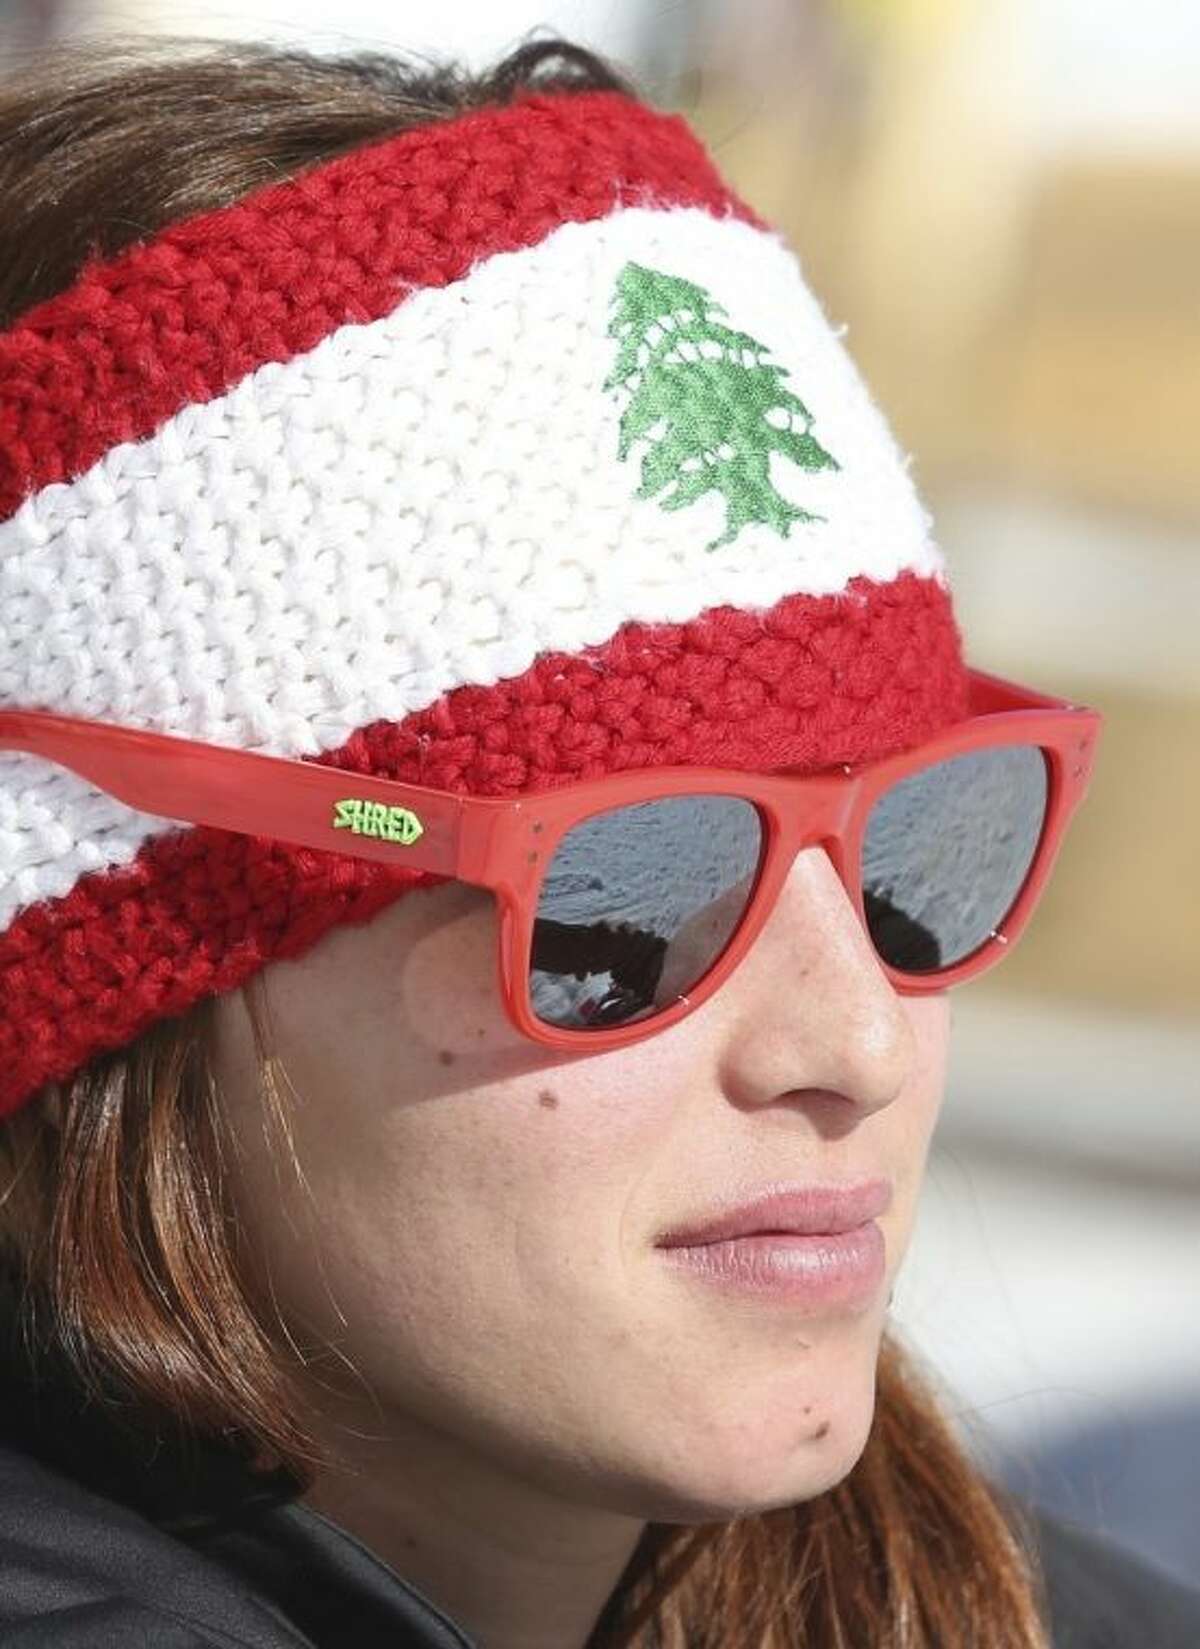 Lebanon's Jacky Chamoun sits near the alpine ski course finish area at the Sochi 2014 Winter Olympics, Thursday, Feb. 13, 2014, in Krasnaya Polyana, Russia. The Lebanese Olympic skier seen topless in revealing photographs and a video that circulated on the Internet says her country's sports officials are "on my side." Three years ago, Chamoun posed for a calendar photo shoot. Behind-the-scenes footage recently was posted online, and Lebanon's Sports and Youth Minister reportedly ordered an investigation. (AP Photo/Luca Bruno)